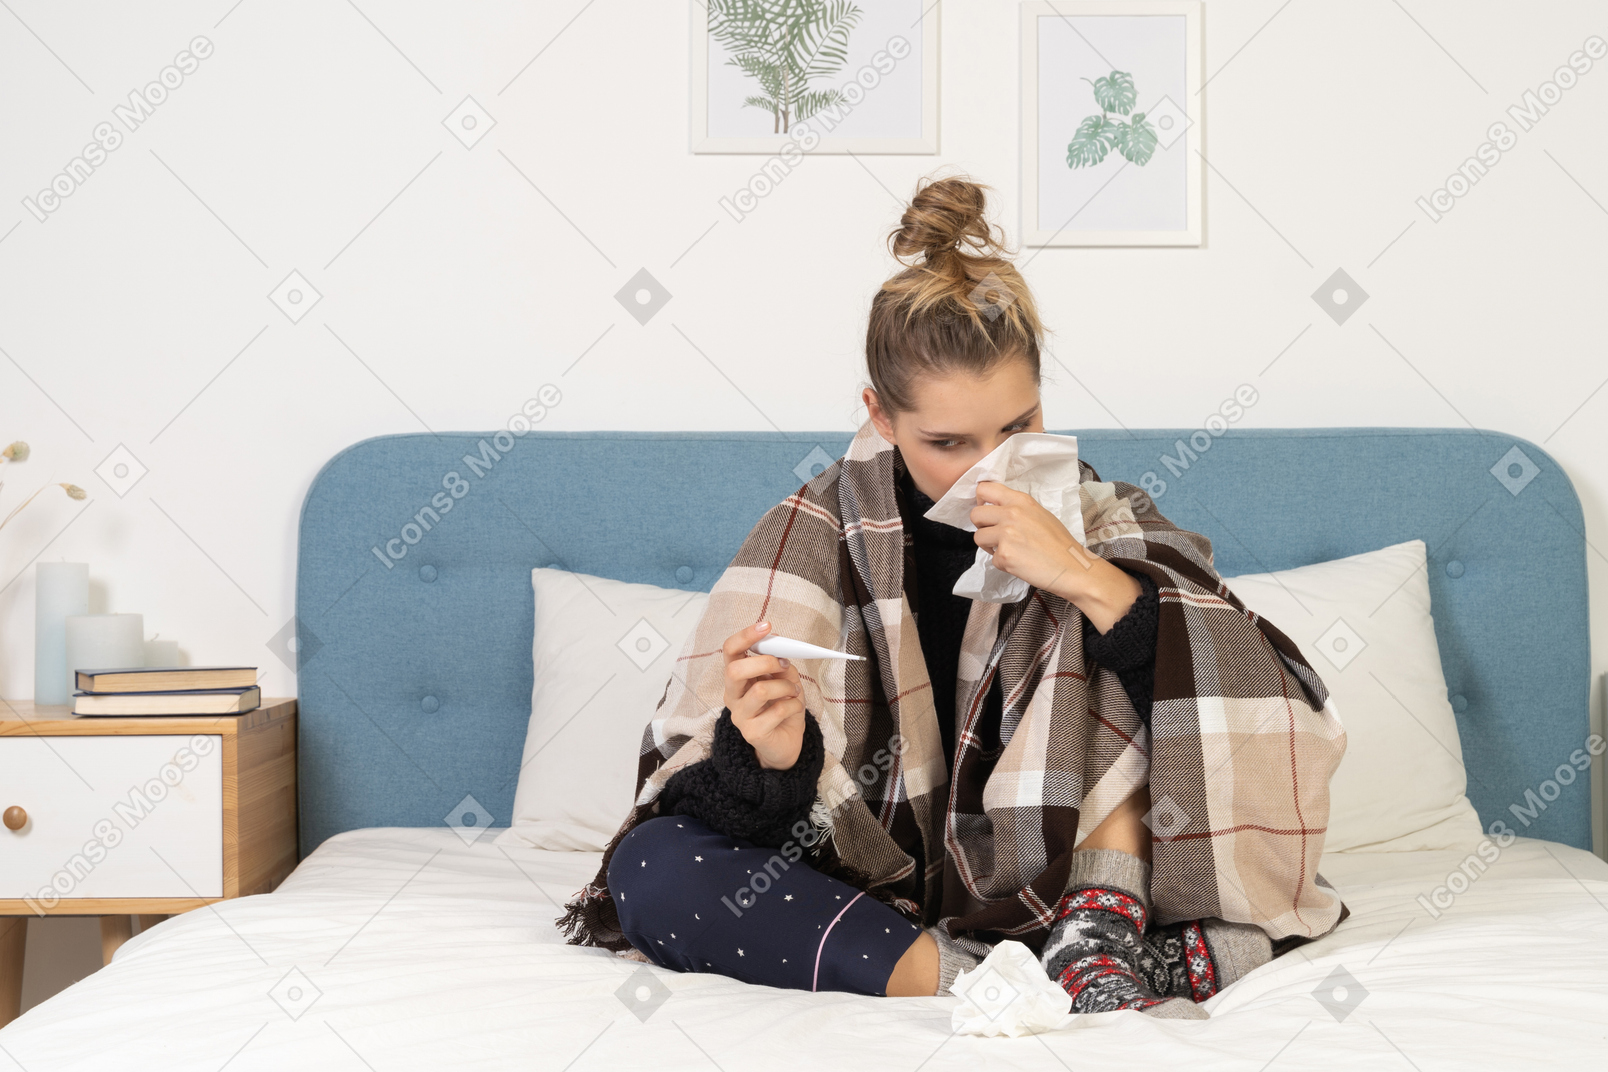 Front view of an ill young lady in pajamas wrapped in checked blanket blowing her nose